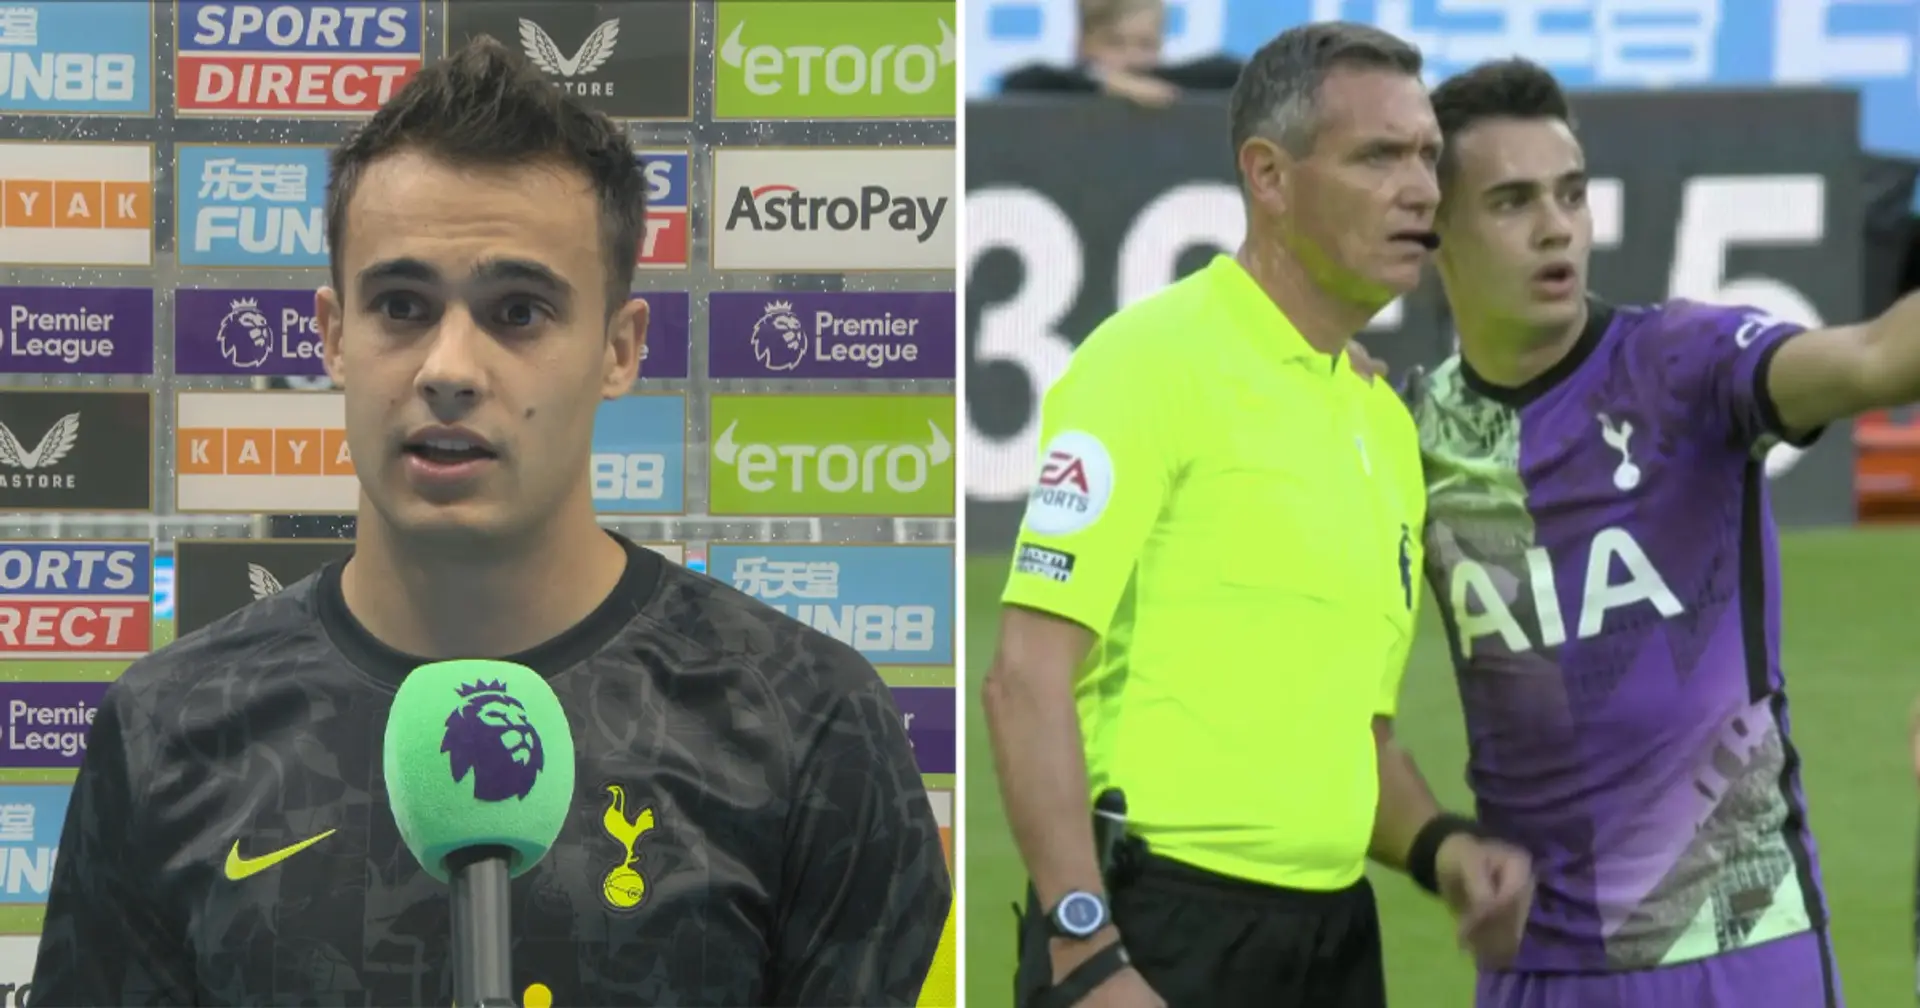 'I was very nervous': Reguilon reacts after possibly helping to save Newcastle fan